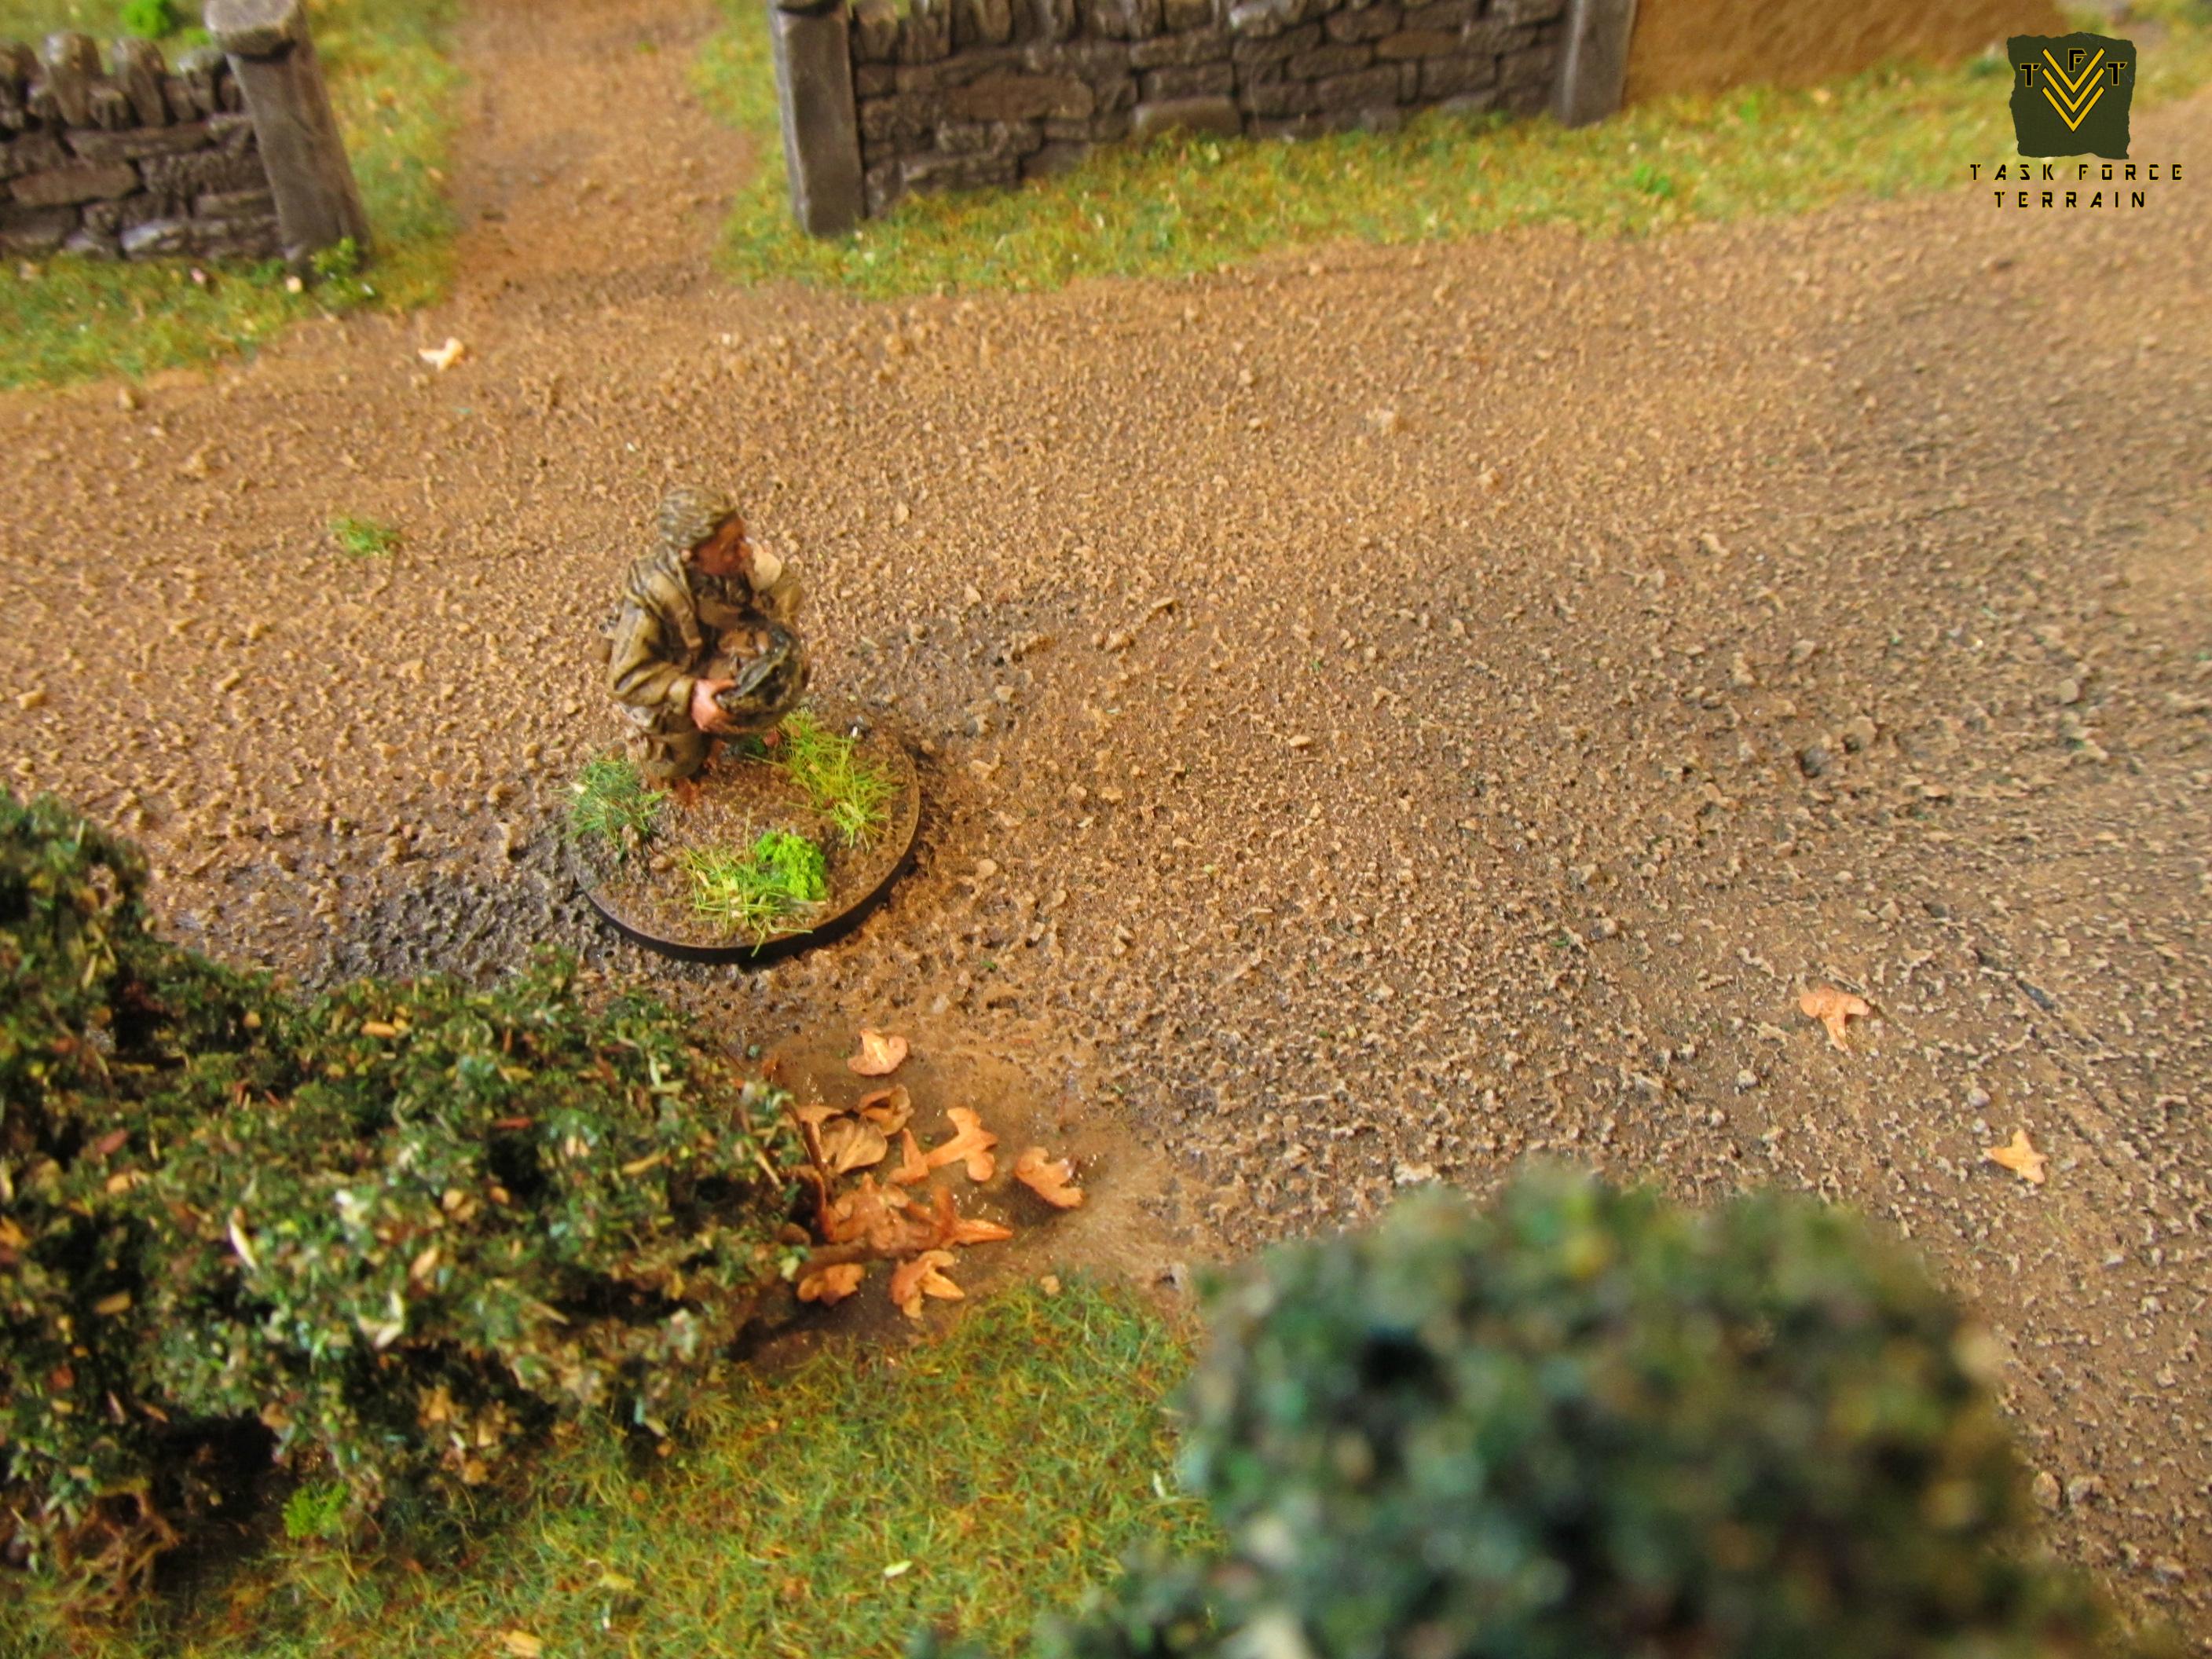 28mm Ww2, Bocage, Bolt Action Scenery, Bolt Action Table, Boltaction, Buildings, Terrain, World War 2, Ww2 Gaming Table, Ww2 Scenery, Ww2 Terrain